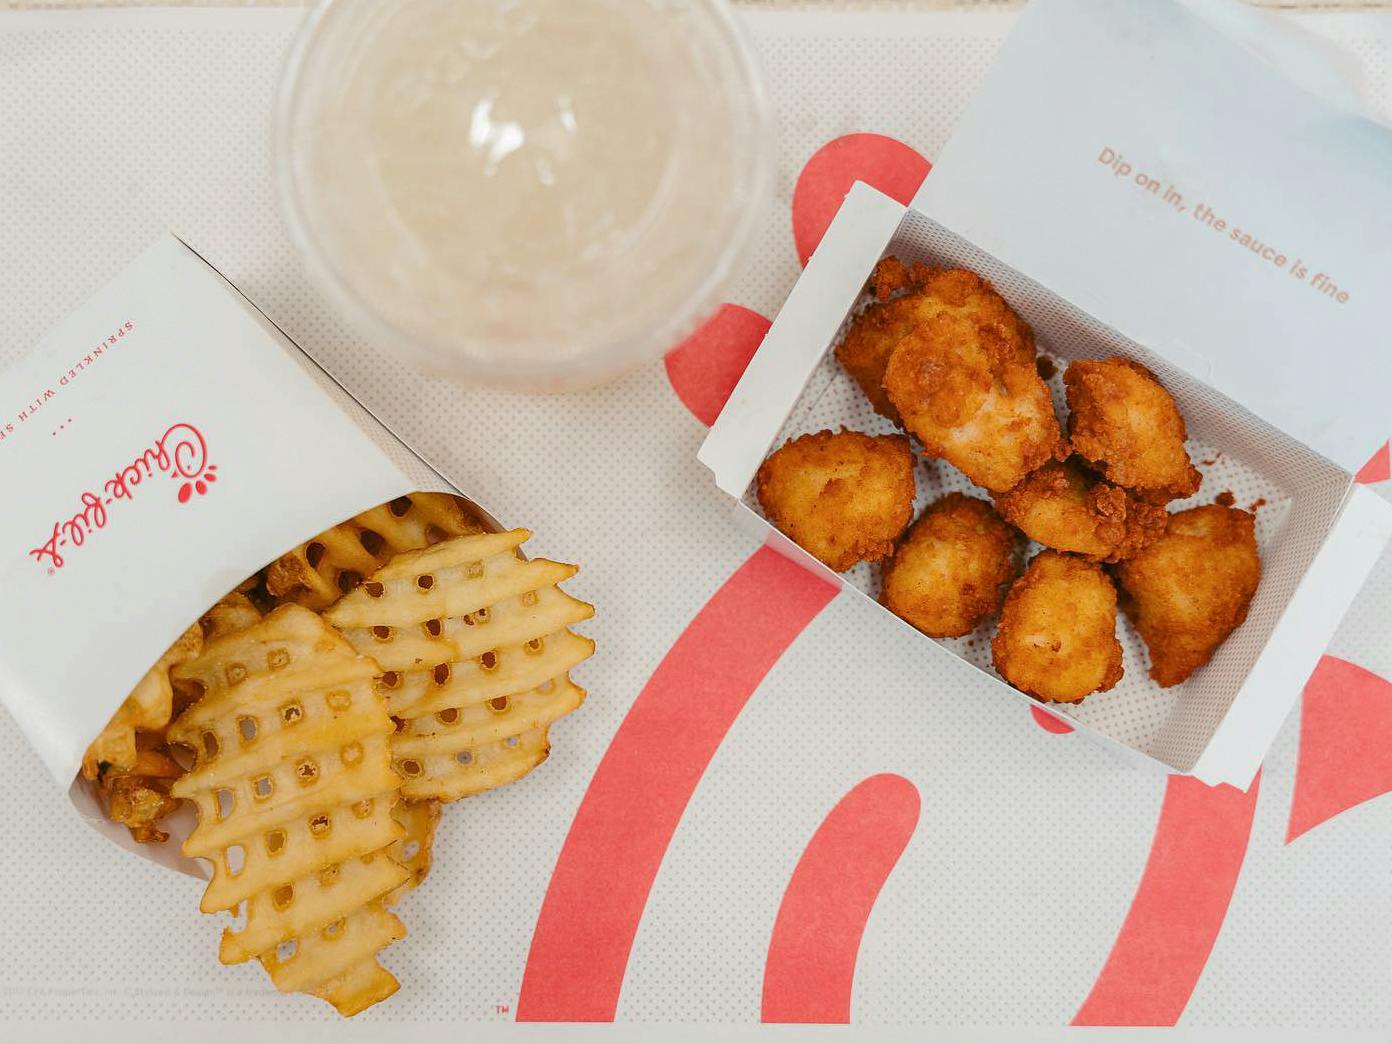 Chick-fil-A chicken nuggets on a table with waffle fries and a drink